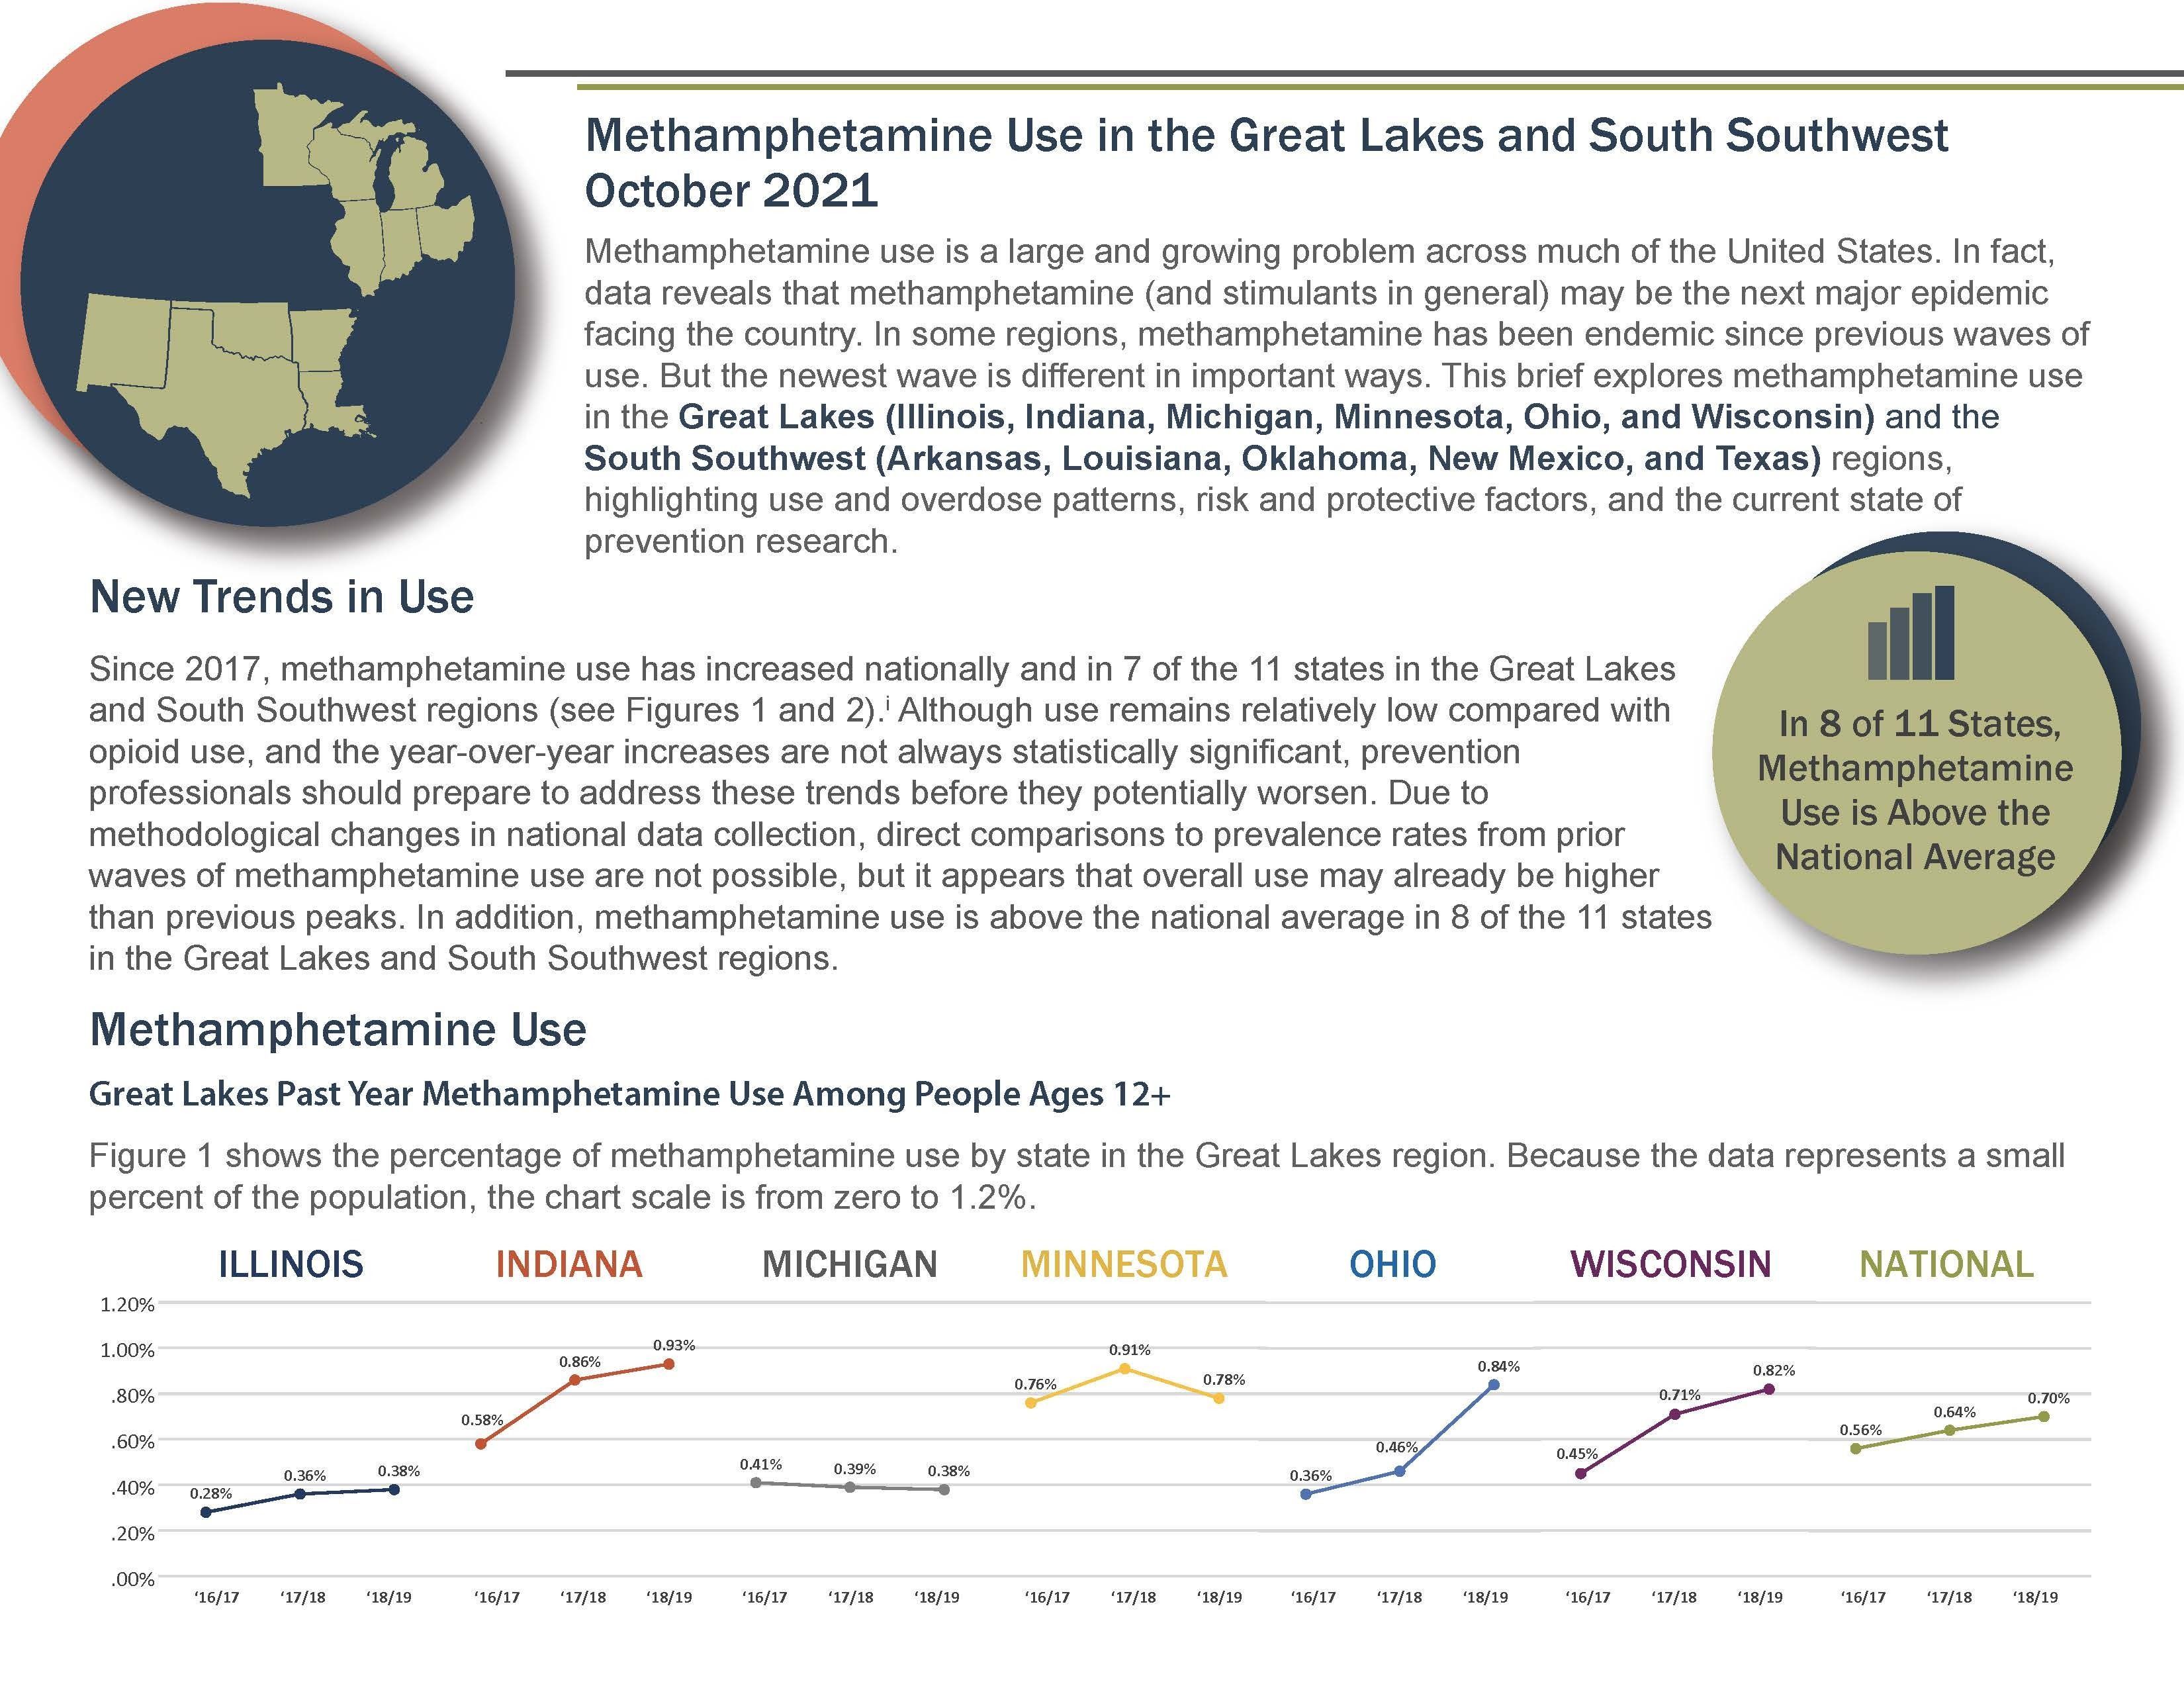 Methamphetamine Use in the Great Lakes and South Southwest